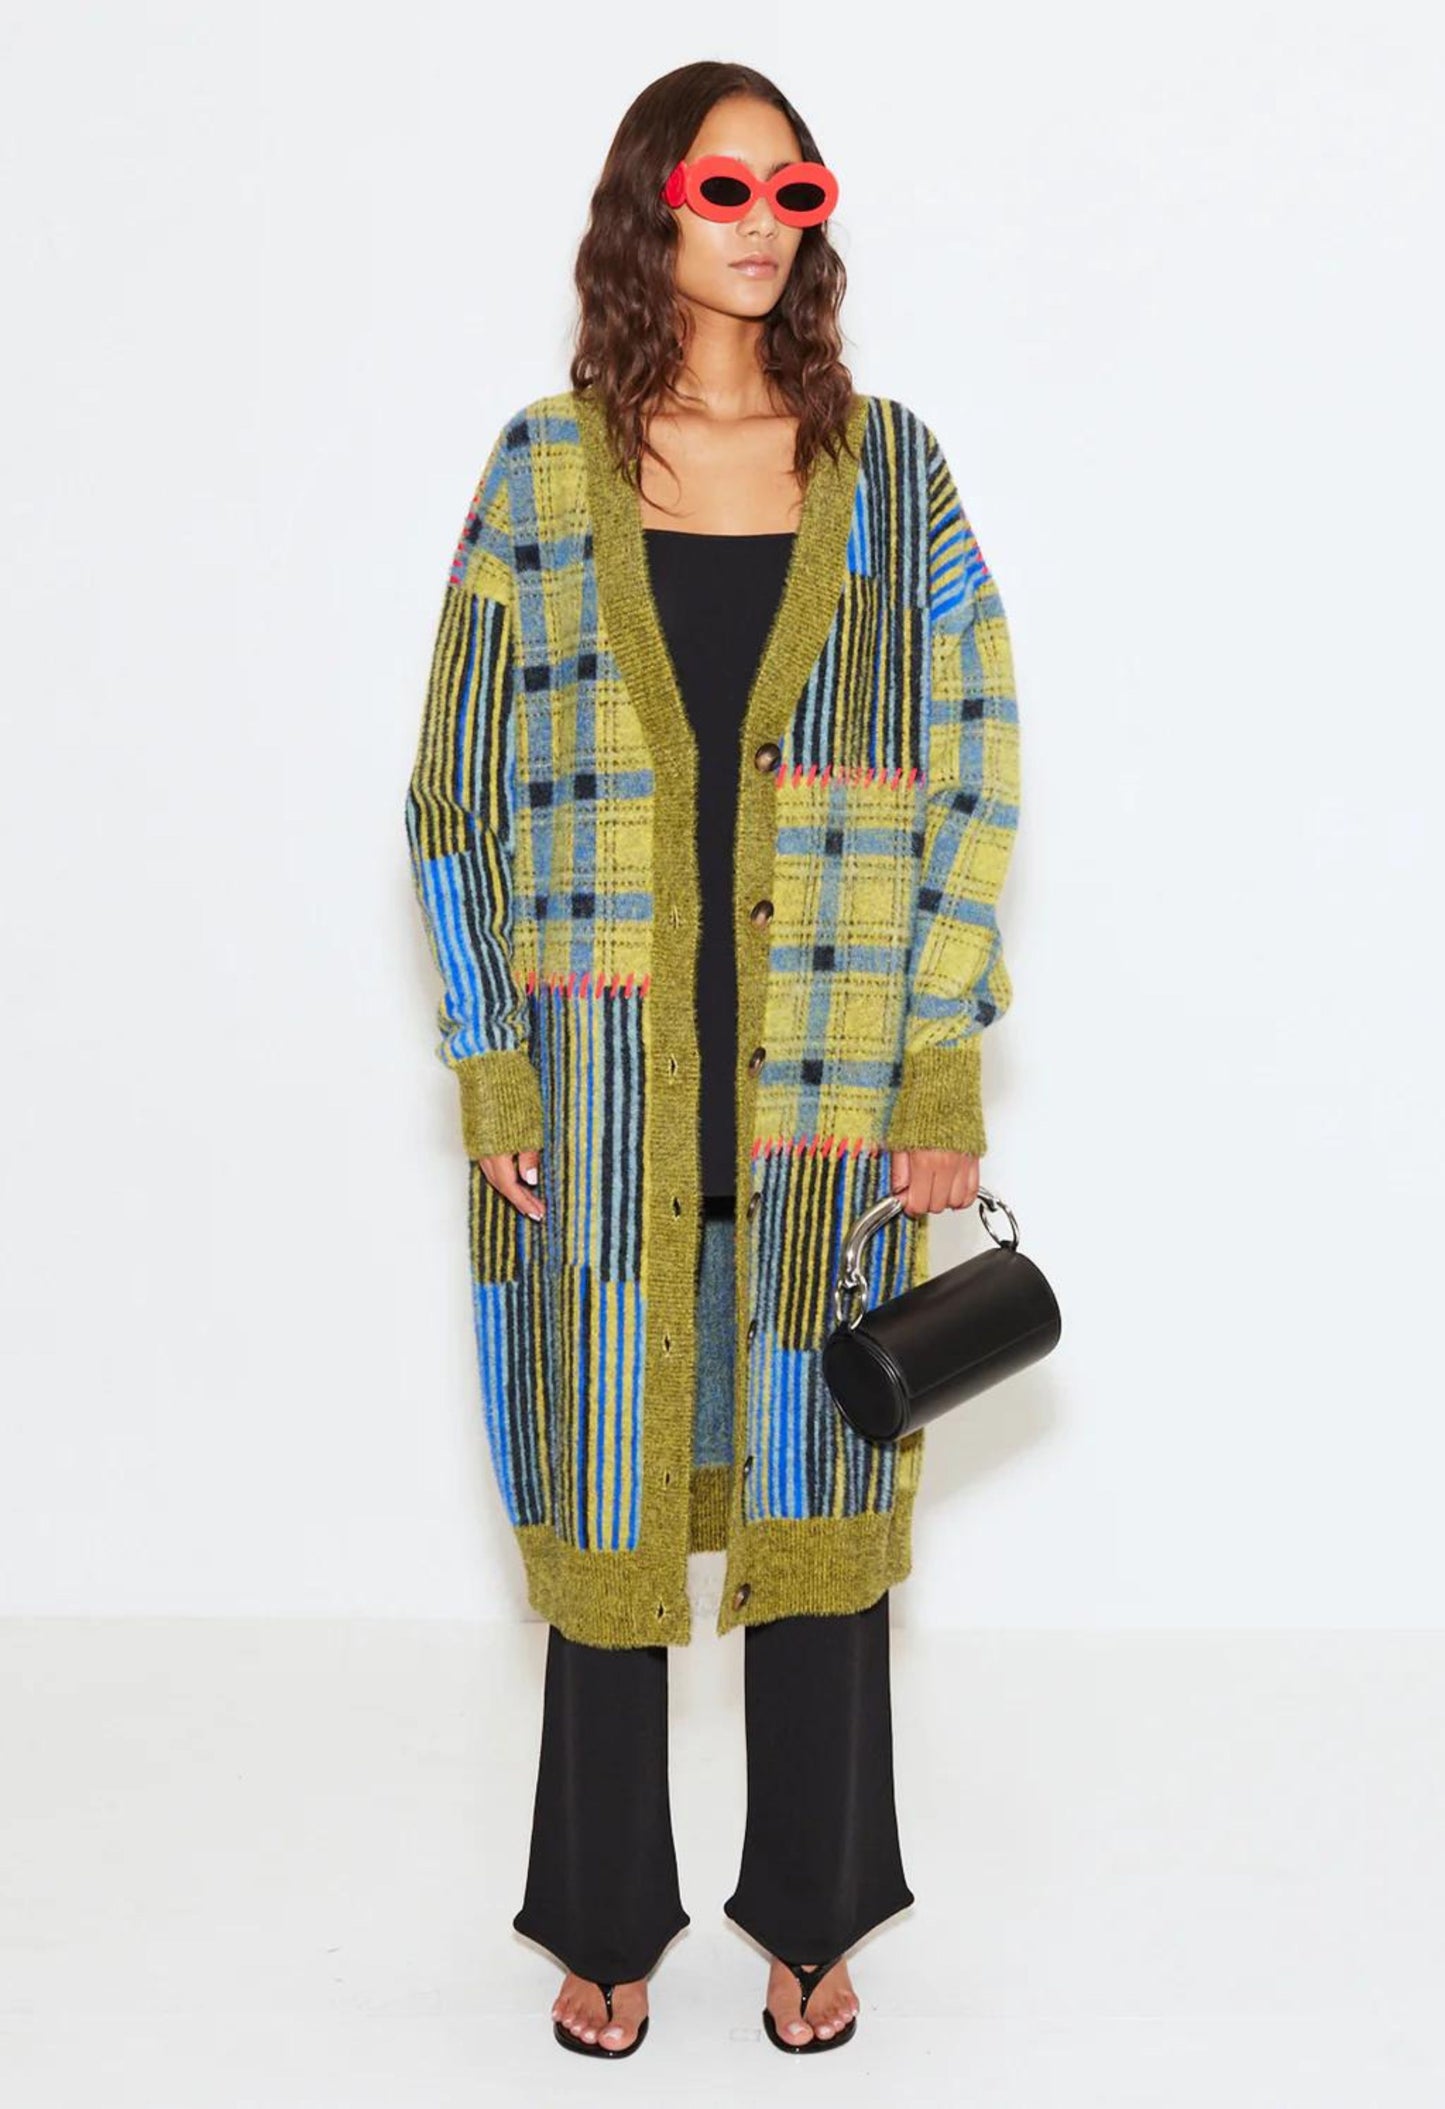 Castle Cardigan in Yellow Plaid – The NKC Store